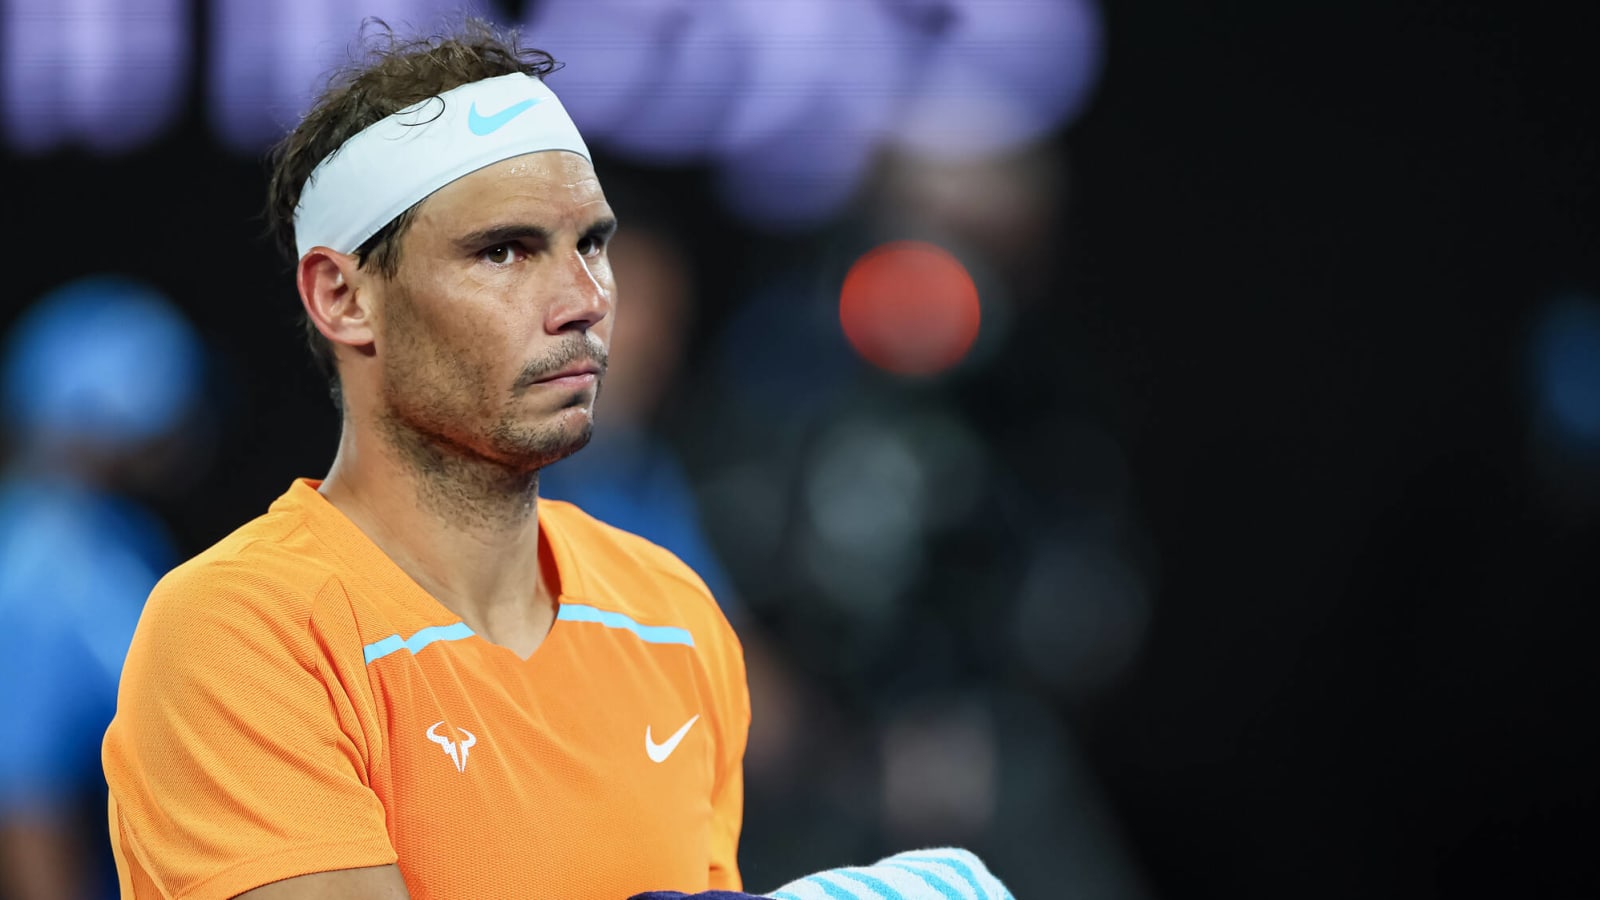 'I think he will play,' Stan Wawrinka puts Rafael Nadal as a favorite for the Roland Garros despite injury concerns